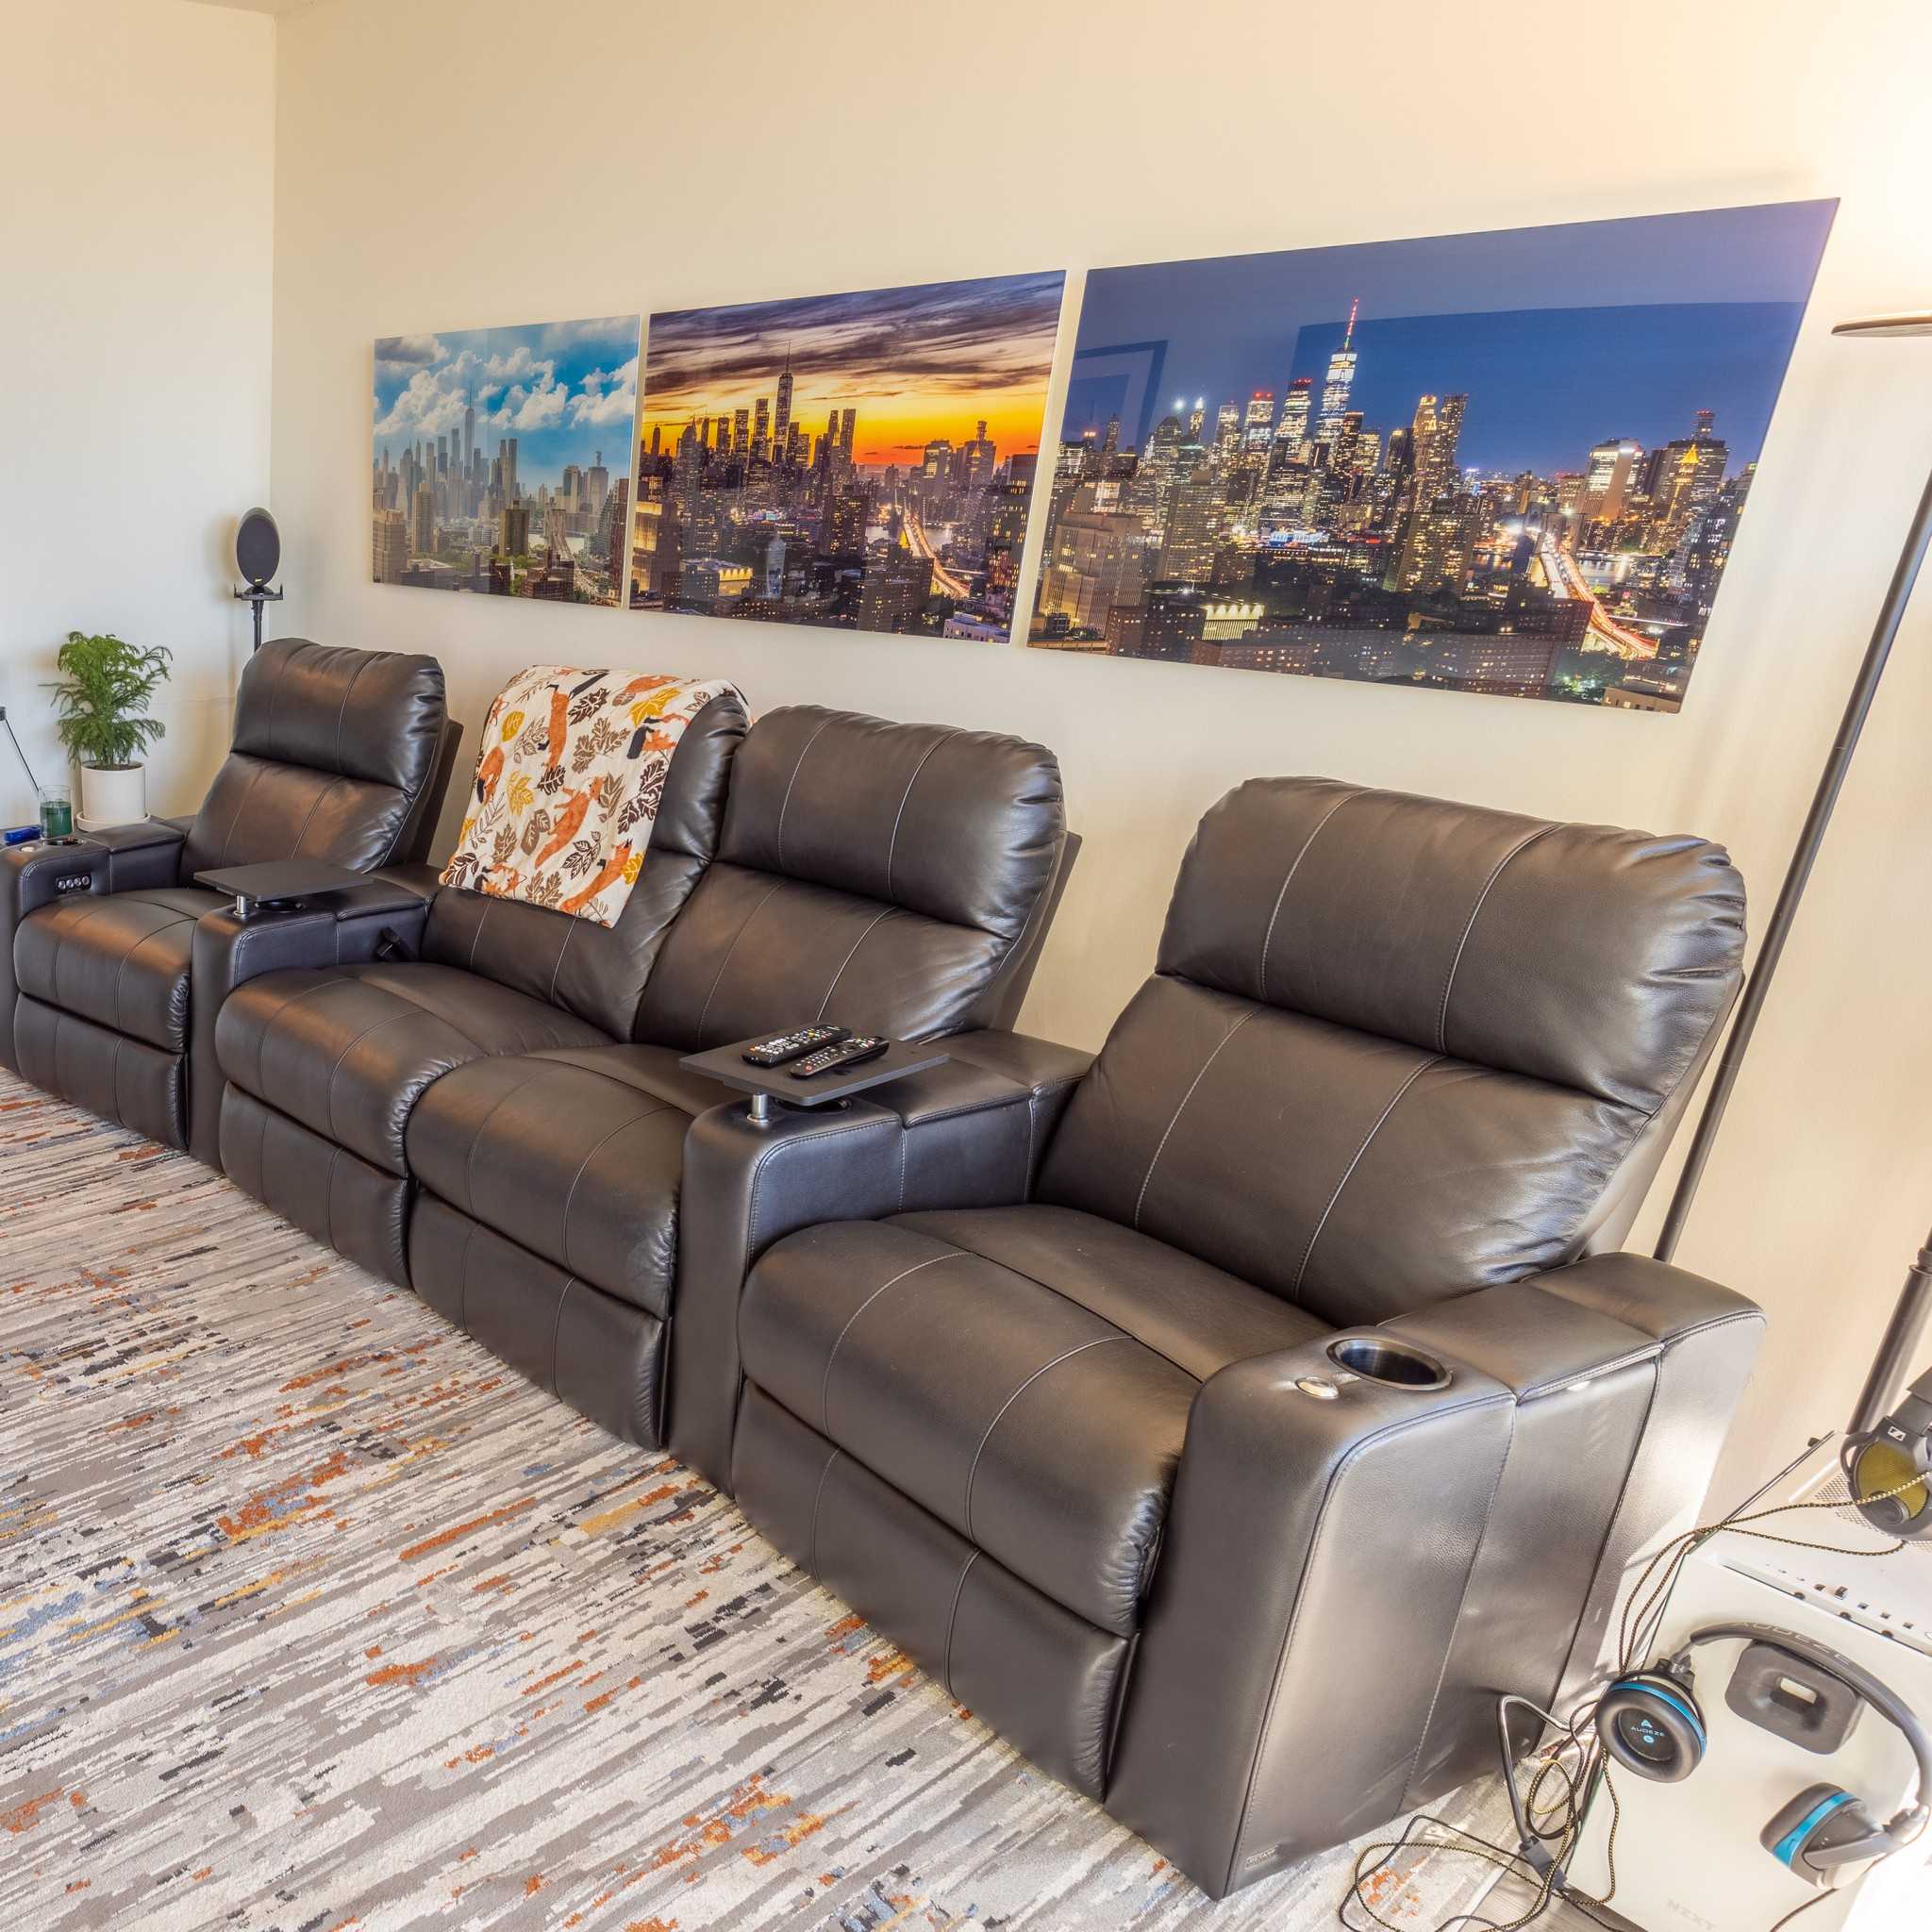 Three acrylic prints of the New York City skyline above leather chairs